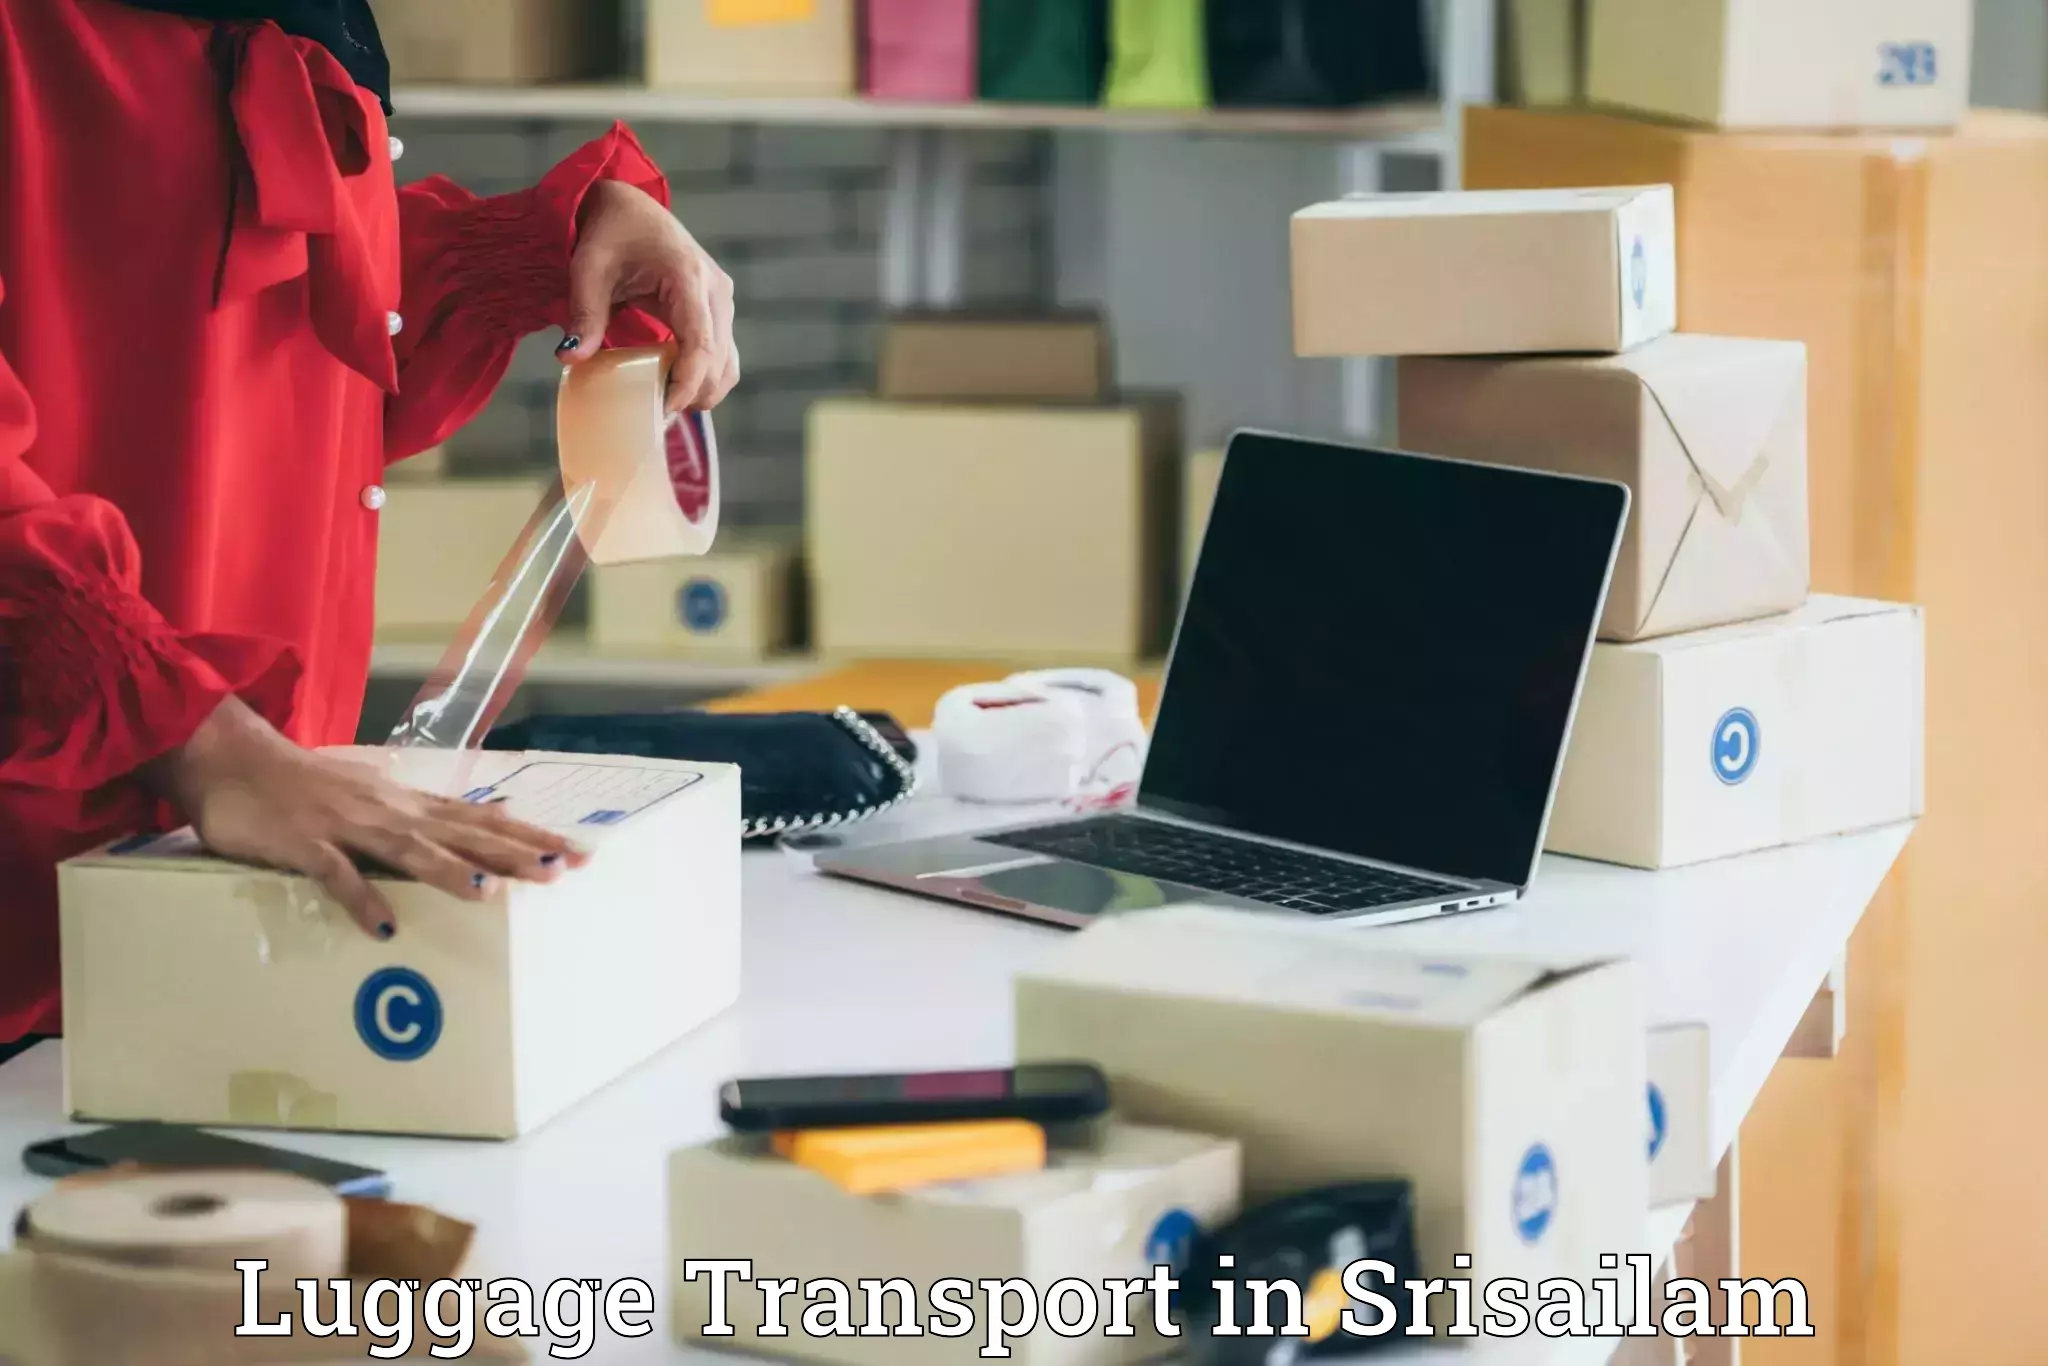 Luggage shipment strategy in Srisailam